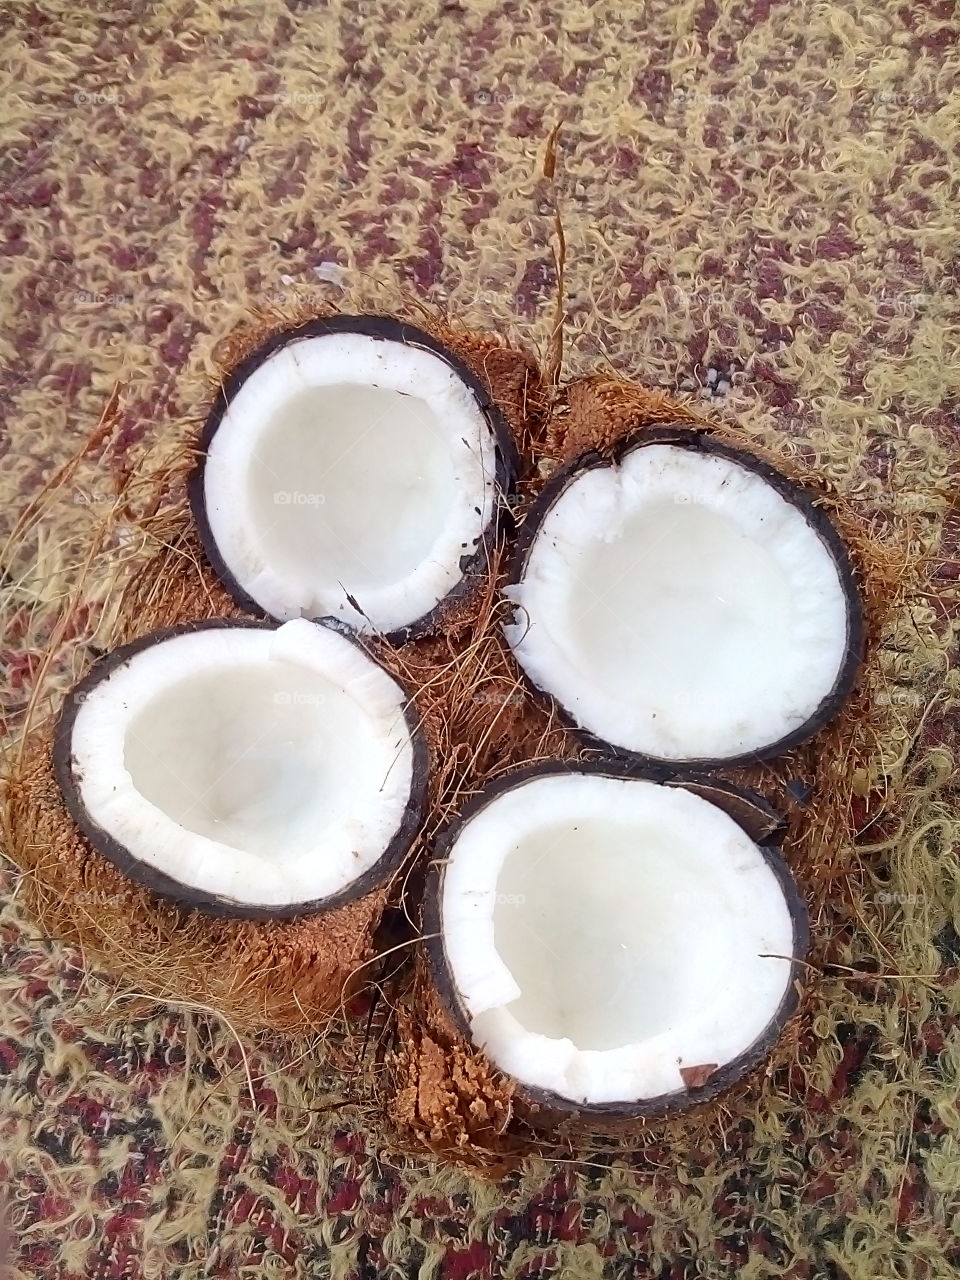 exotic fruit - coconut on the ground